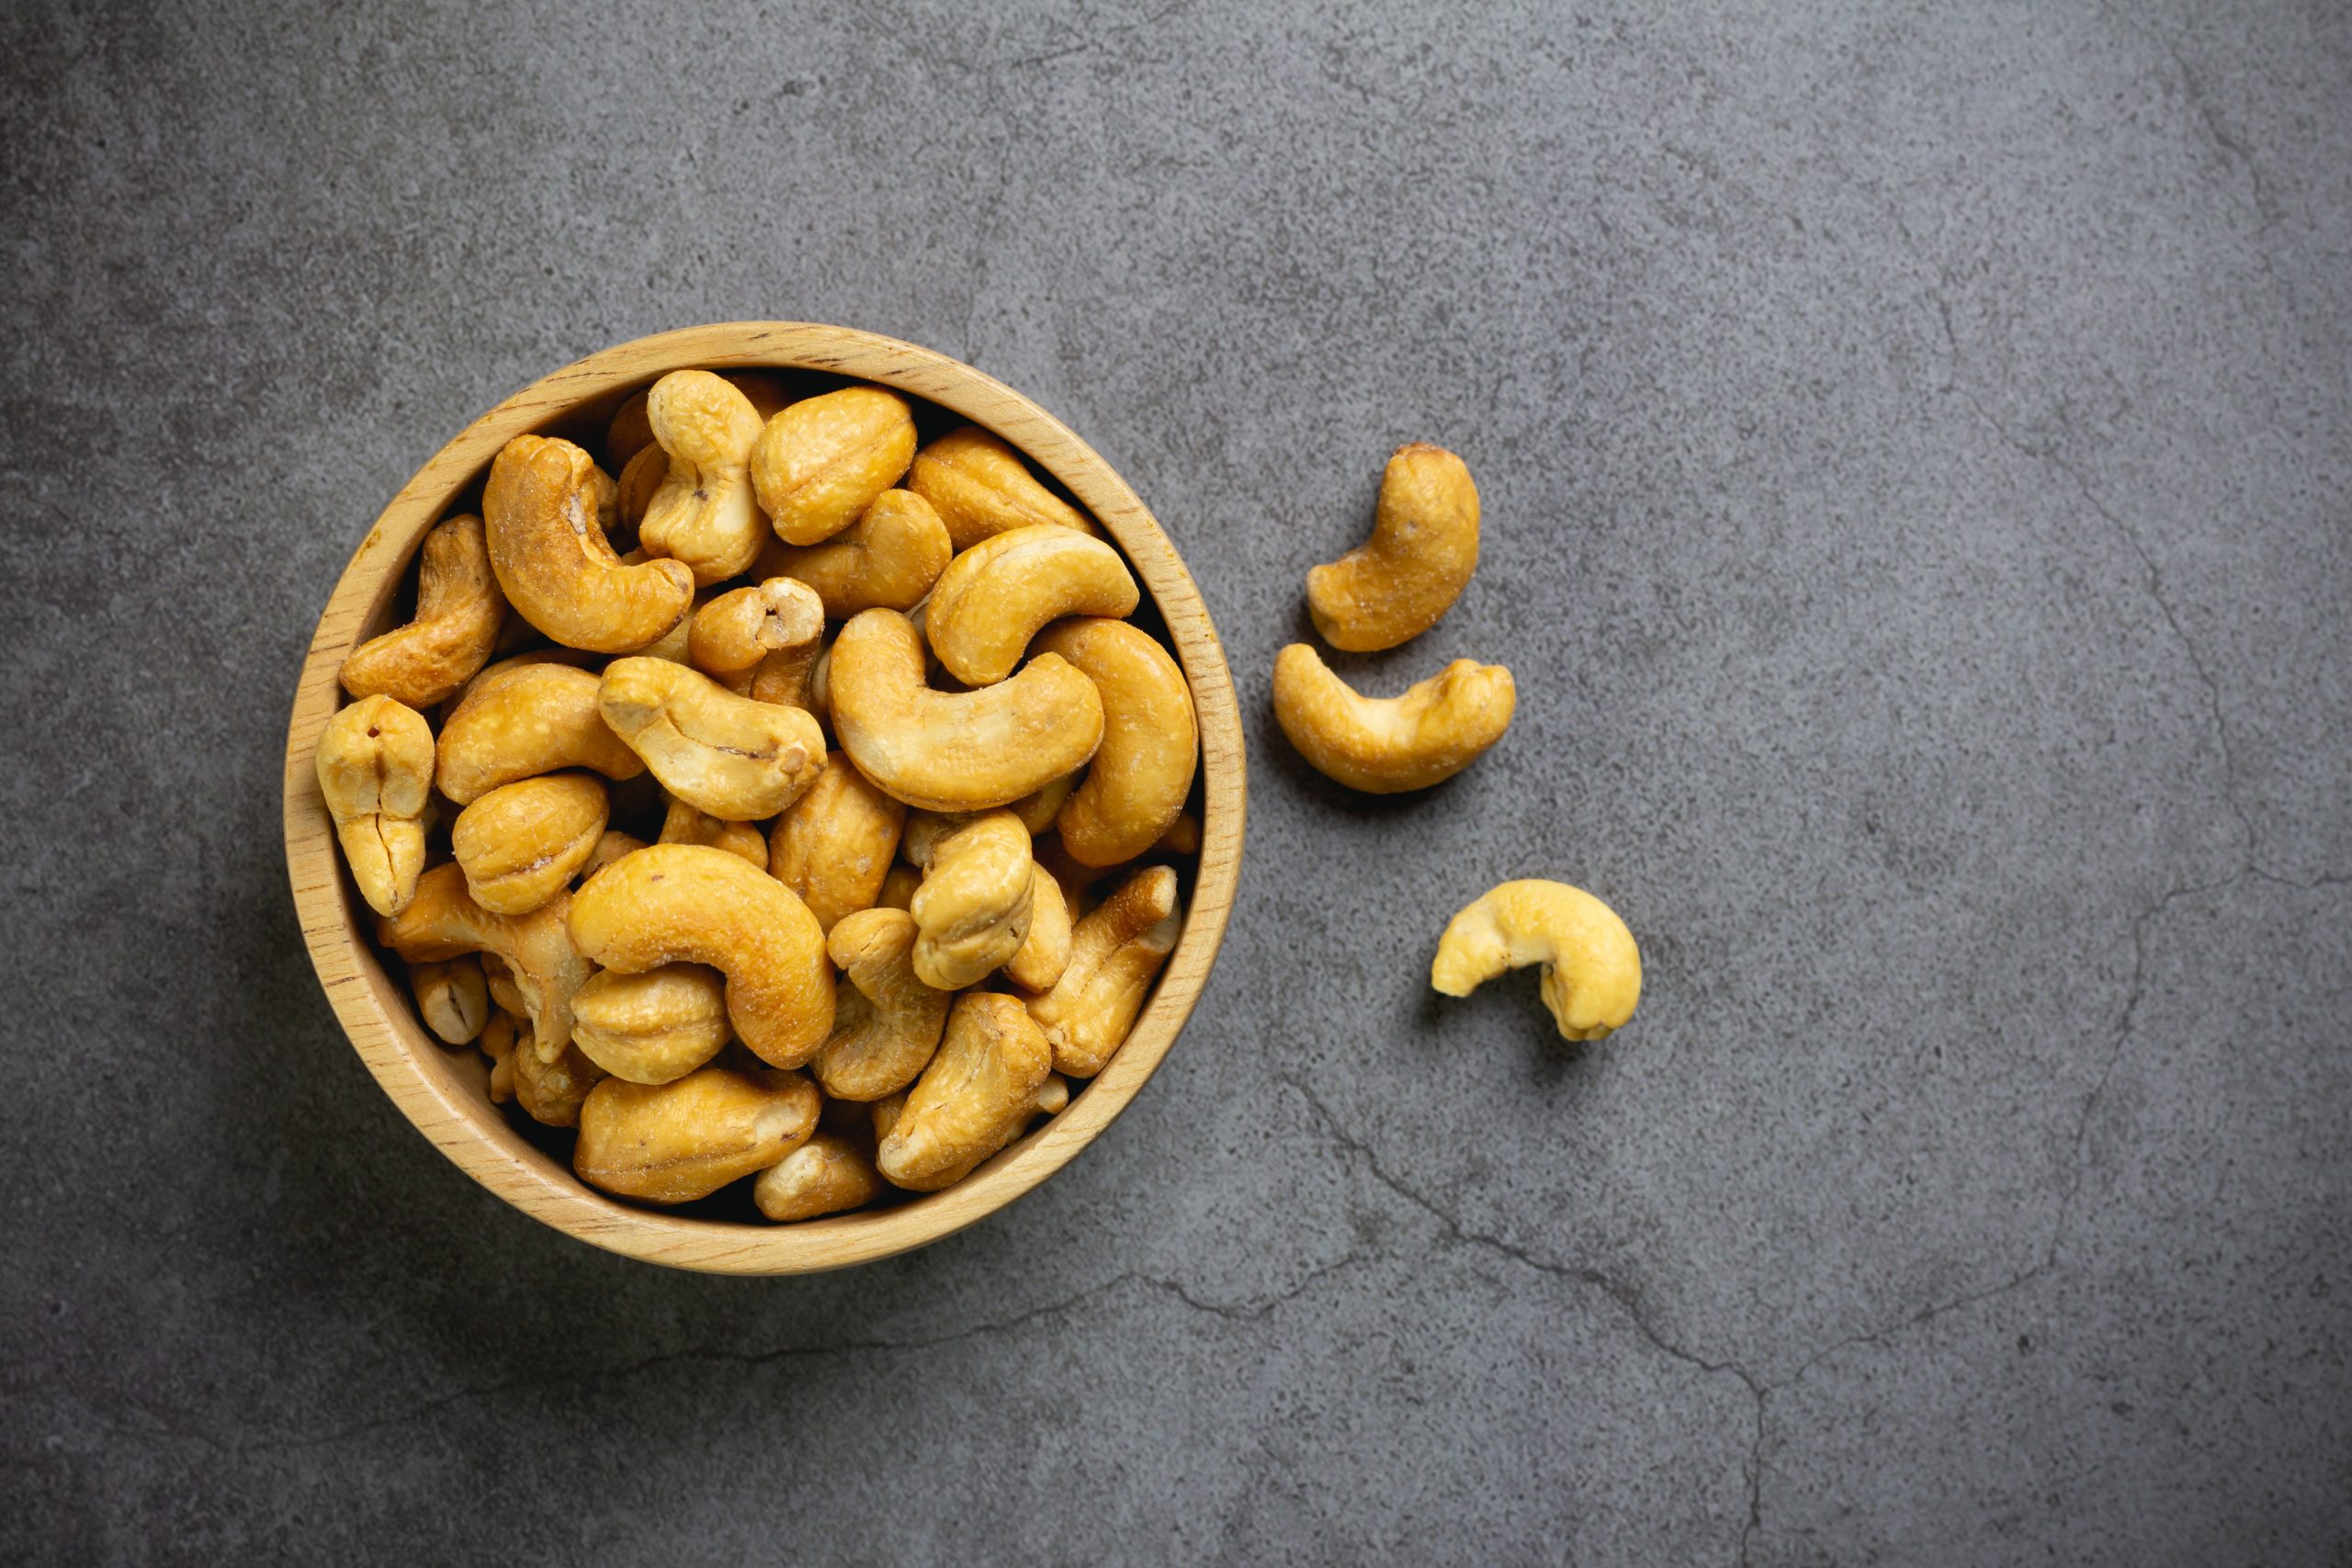 Online Shopping for Organic Cashews: A Guide to Finding Quality Products